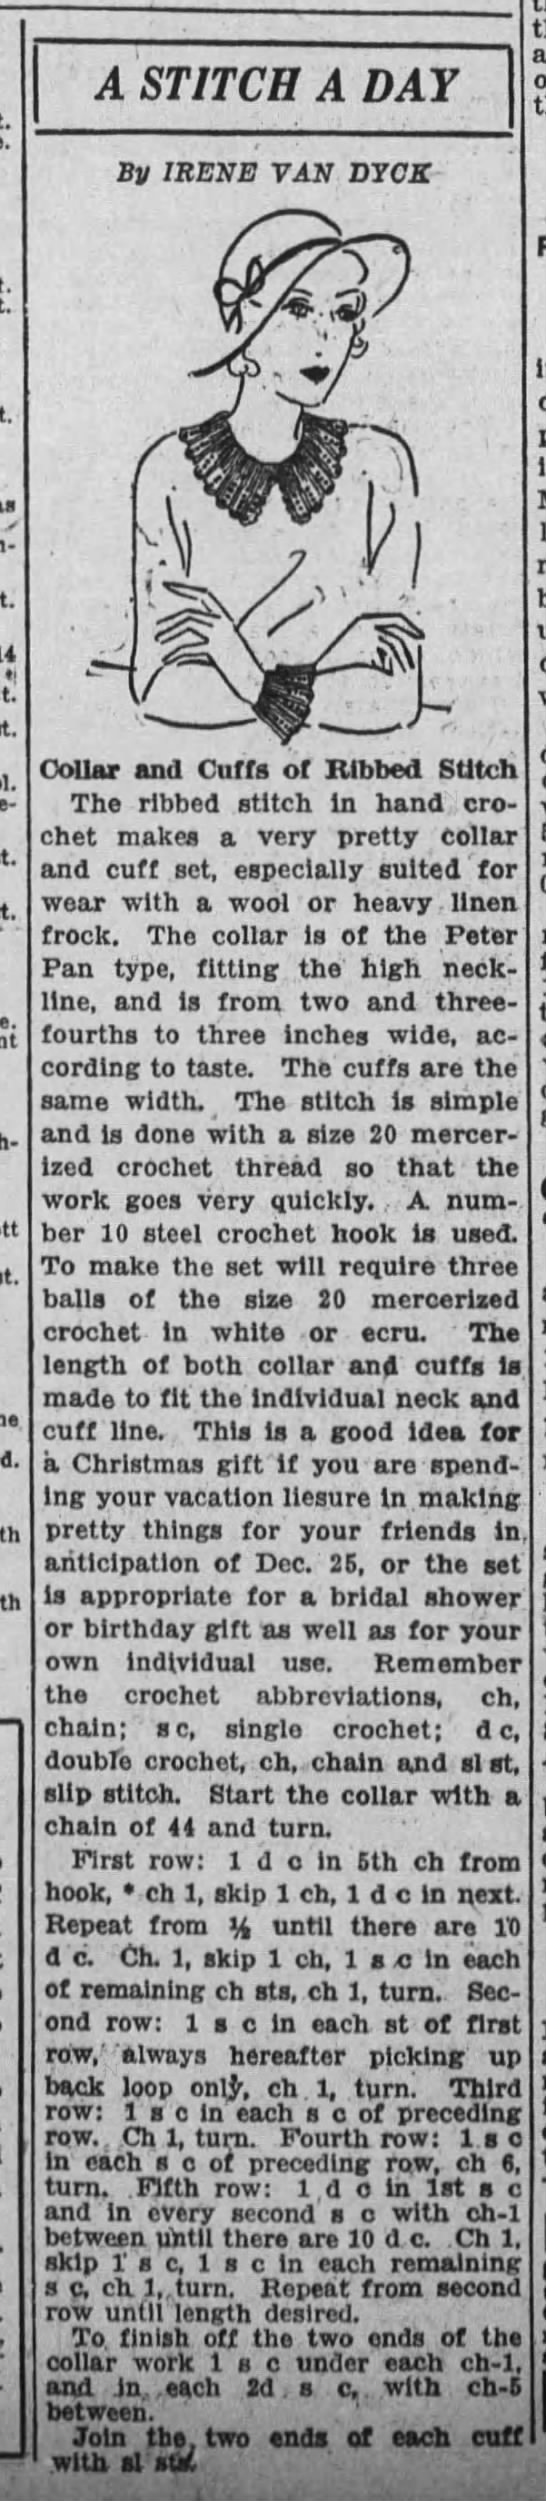 "Collar and cuffs of ribbed stitch" crochet pattern (1932) - 